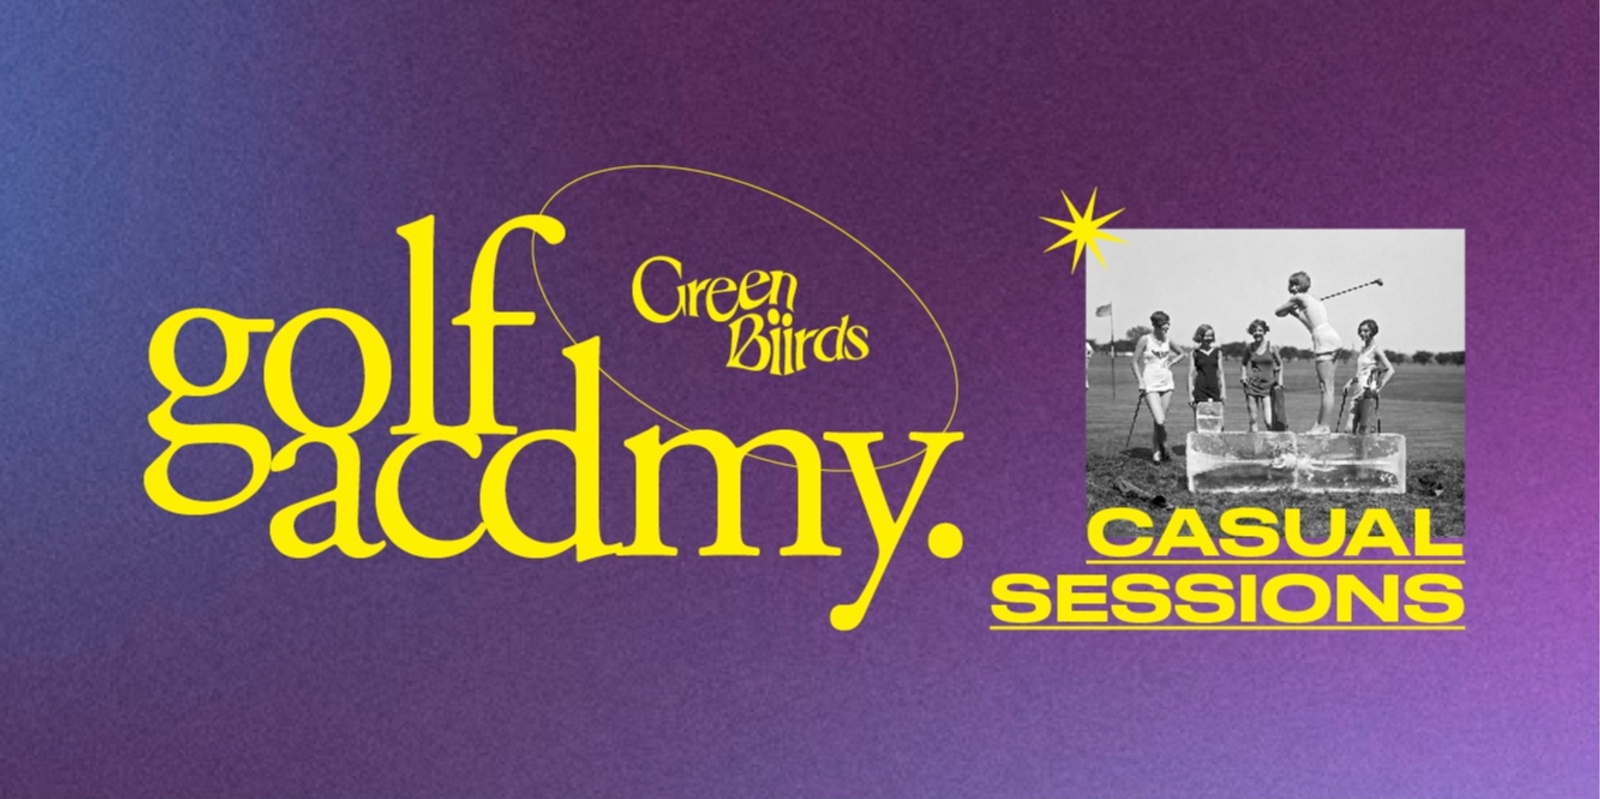 Banner image for Greenbiirds Golf Acdmy — December Casual Sessions